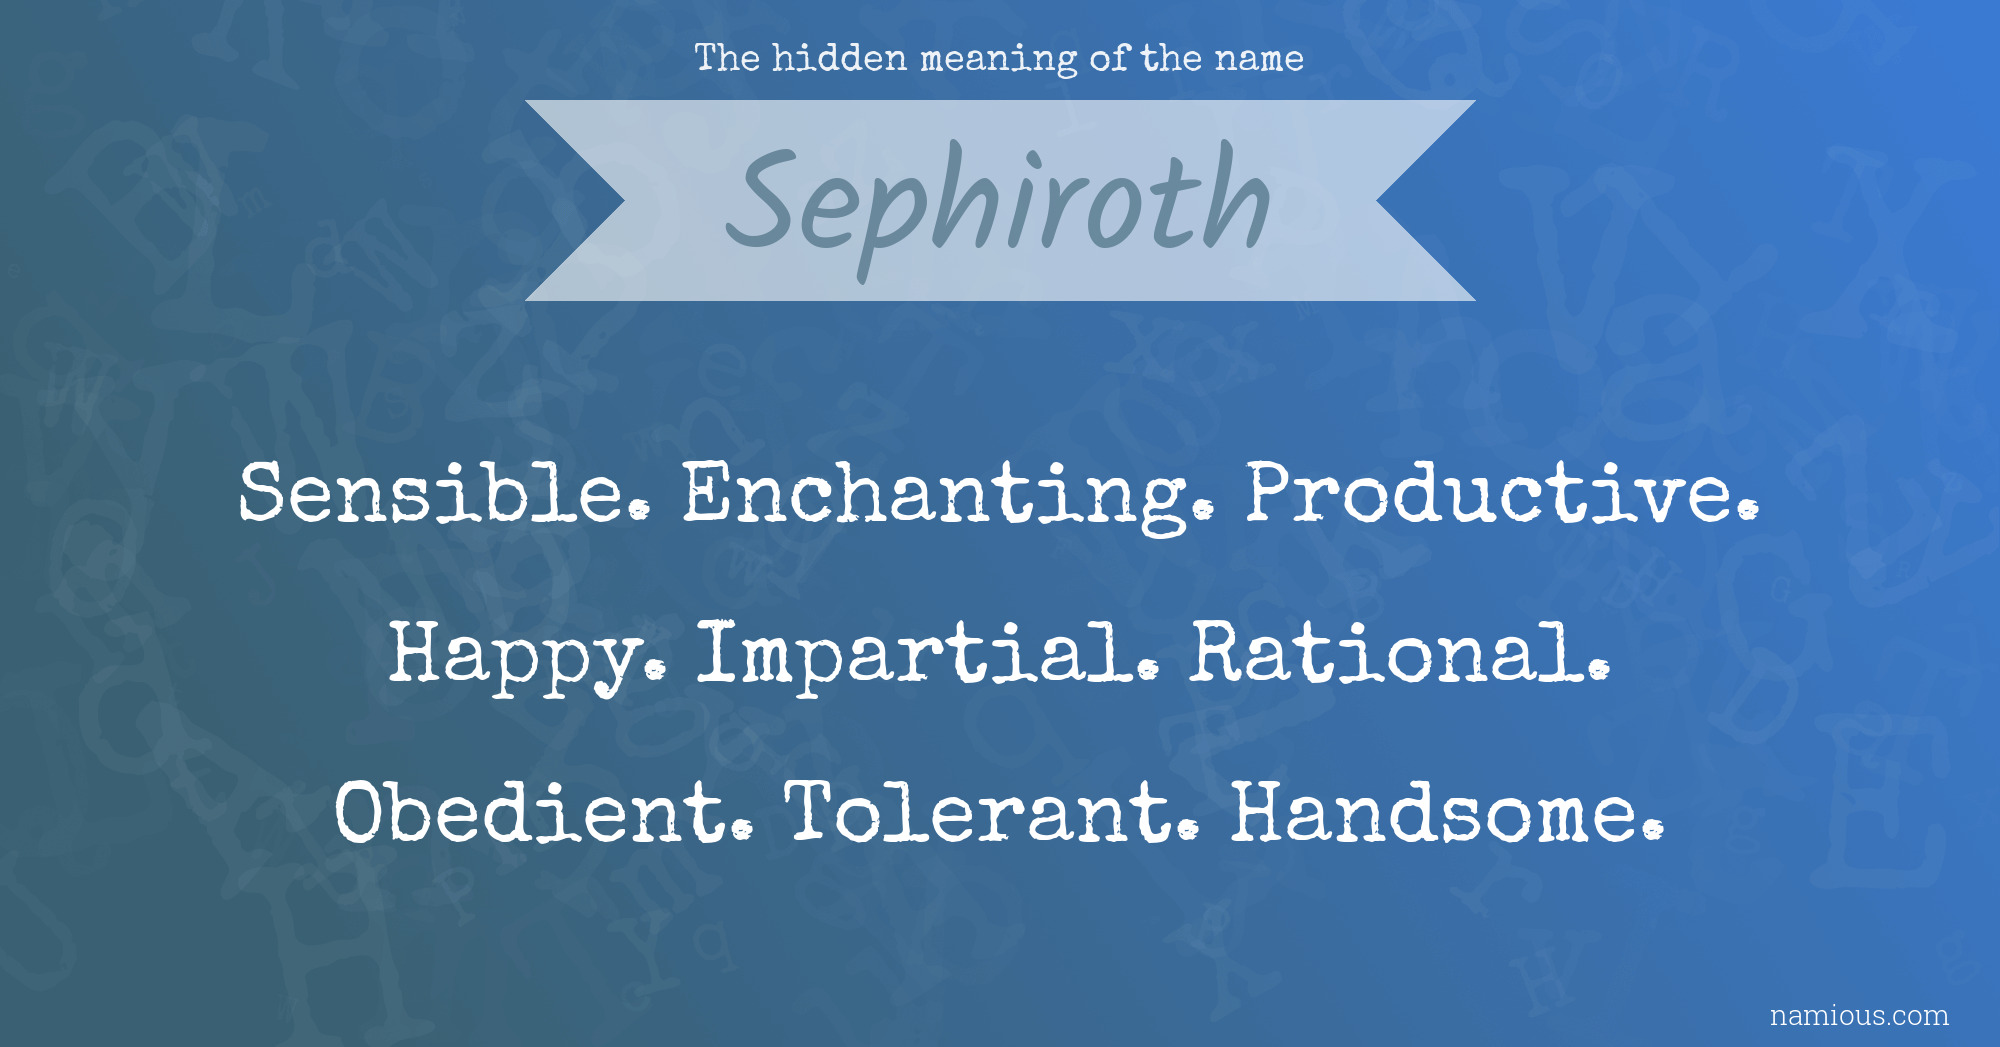 The hidden meaning of the name Sephiroth